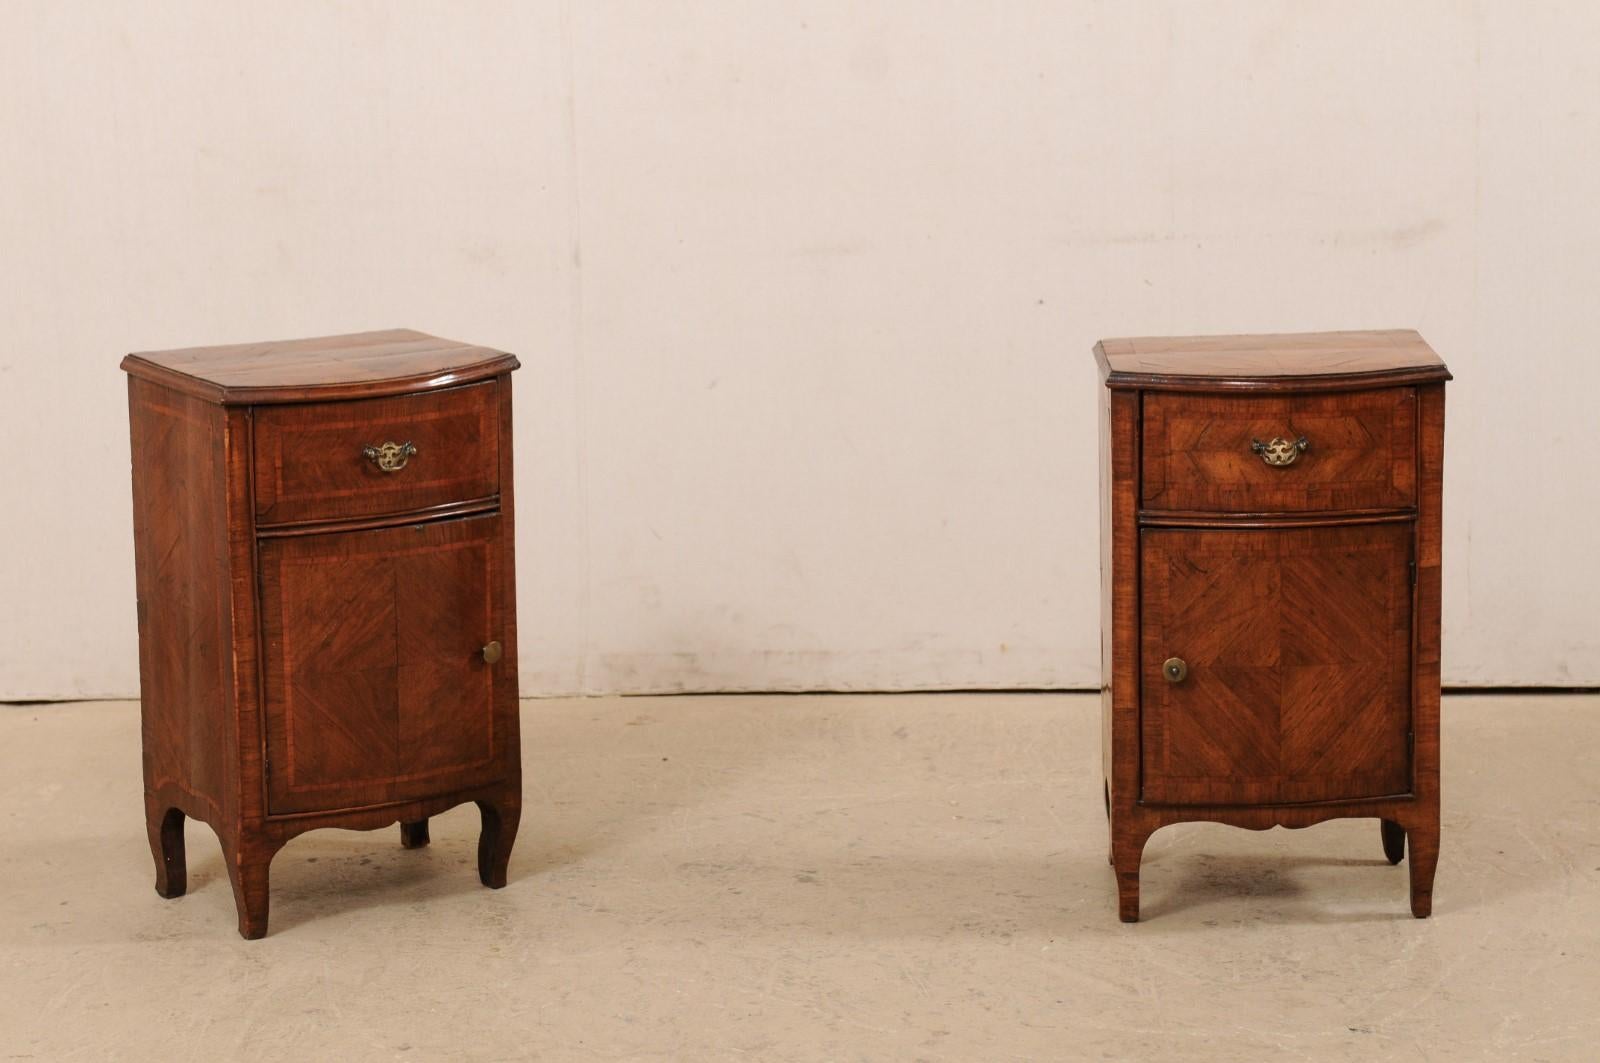 An Italian pair of small-sized bow-front wooden side cabinets from the turn of the 18th and 19th century. This antique pair of commodini from Italy are each adorn in lovely wood banding and inlay, and feature a bow-front top over case with matching